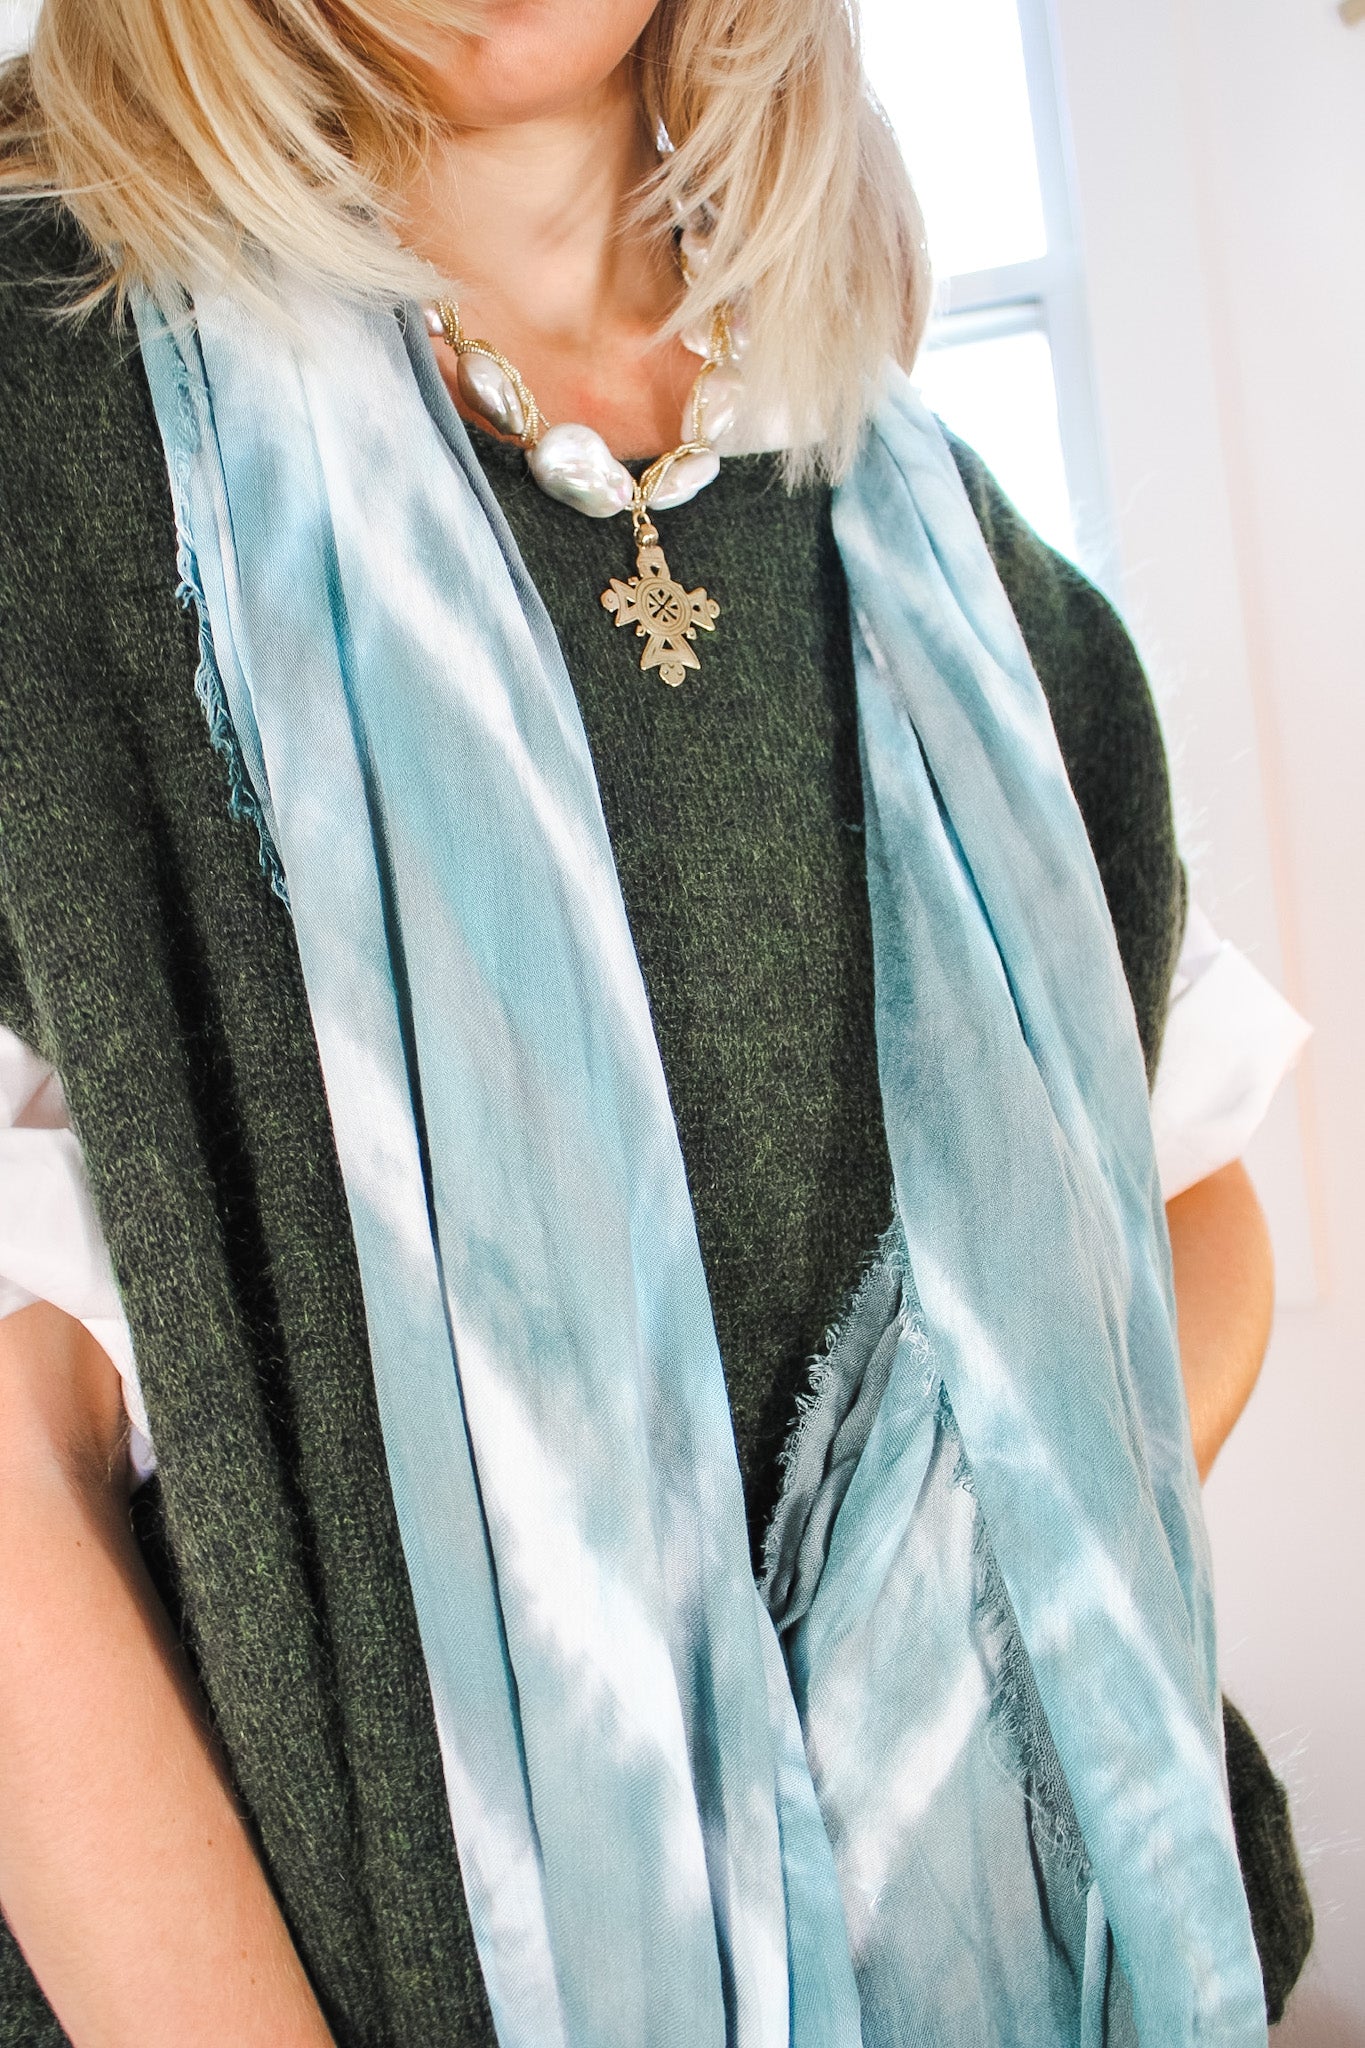 Double Knot Scarf - Grey/Turquoisefig & bellaScarf